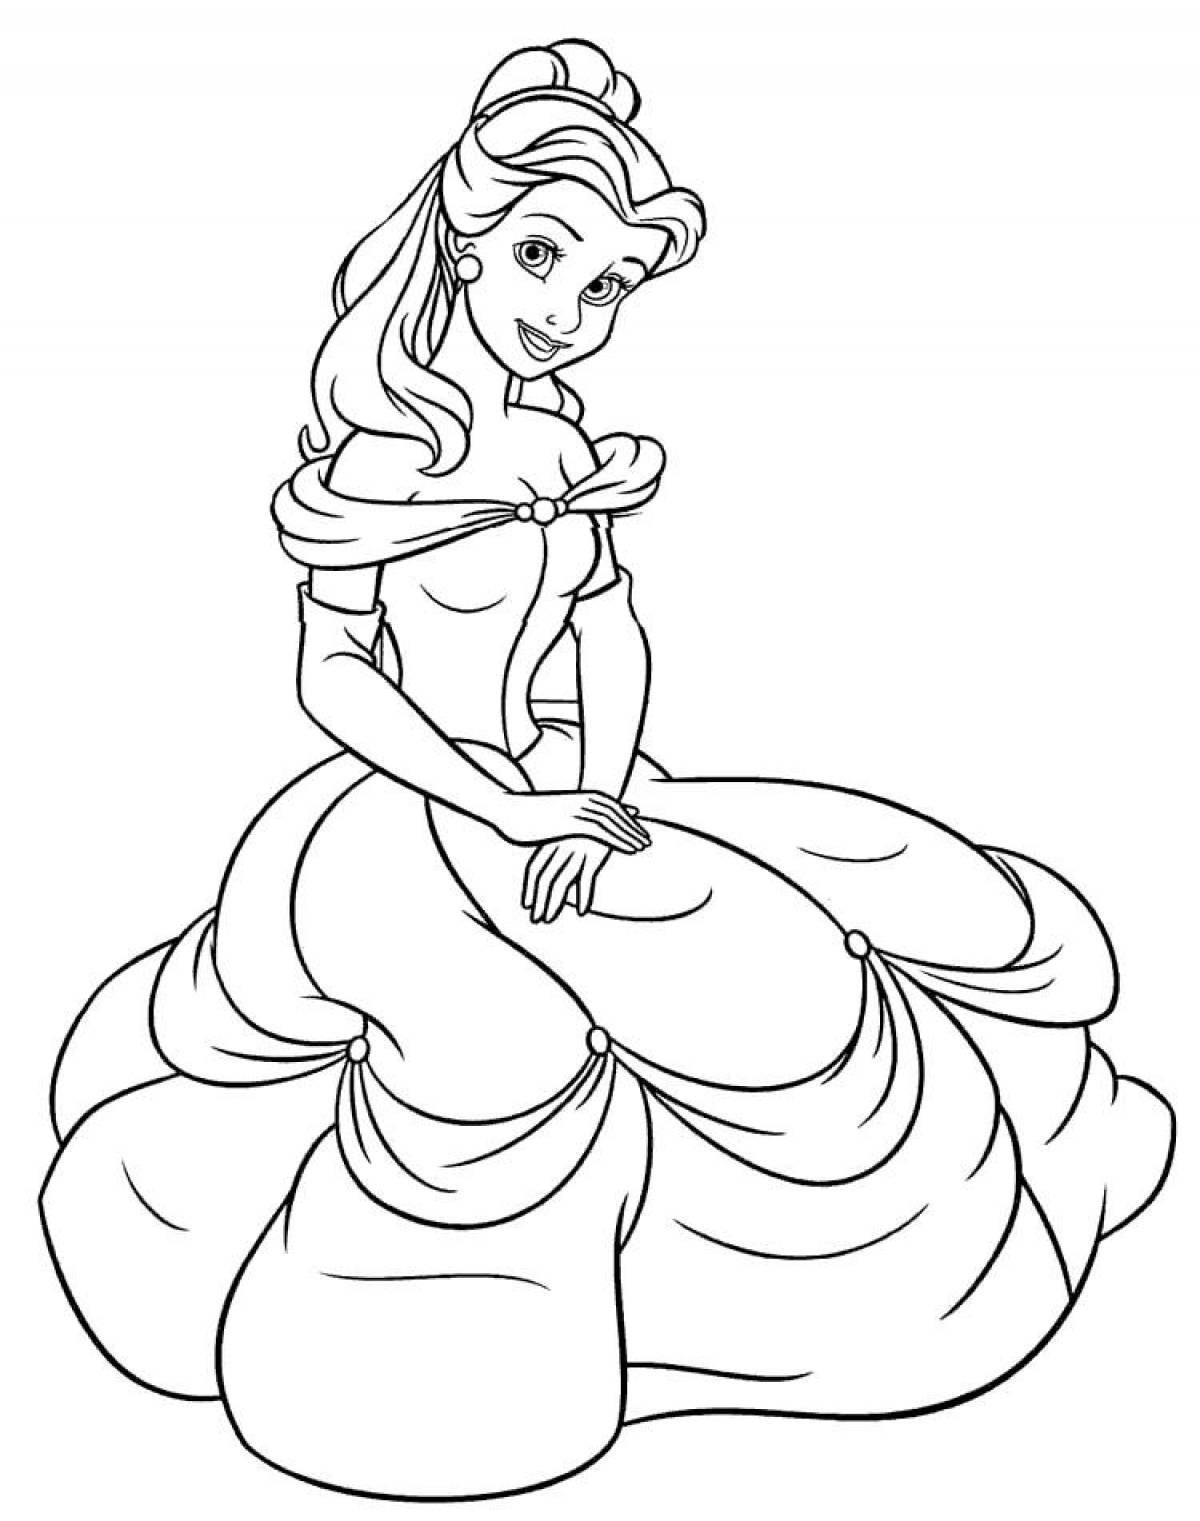 Exquisite belle coloring page